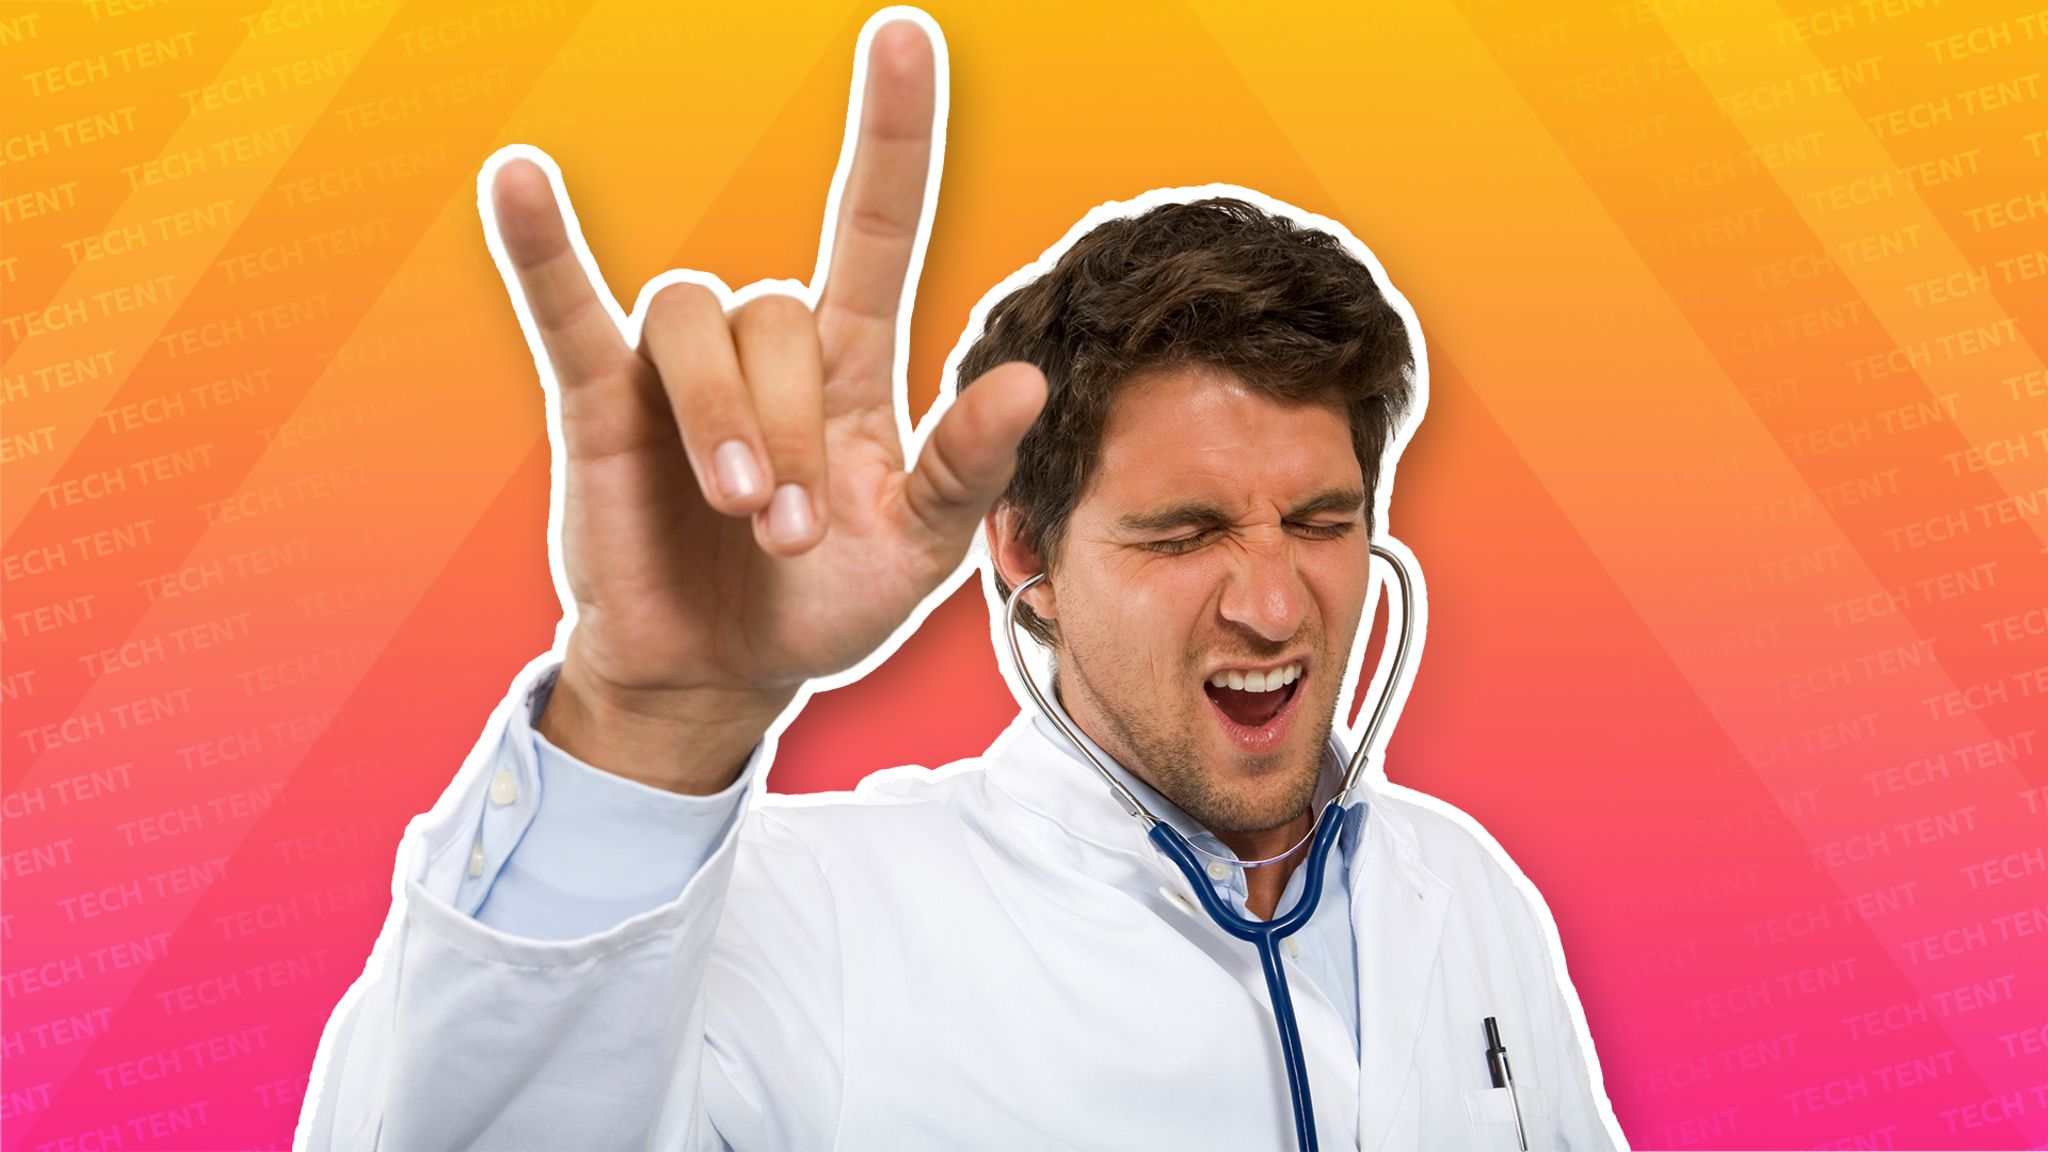 A man wearing a white coat and wearing a doctor's stethoscope in his ears raises his hand in "devils horns" as if rocking out to music